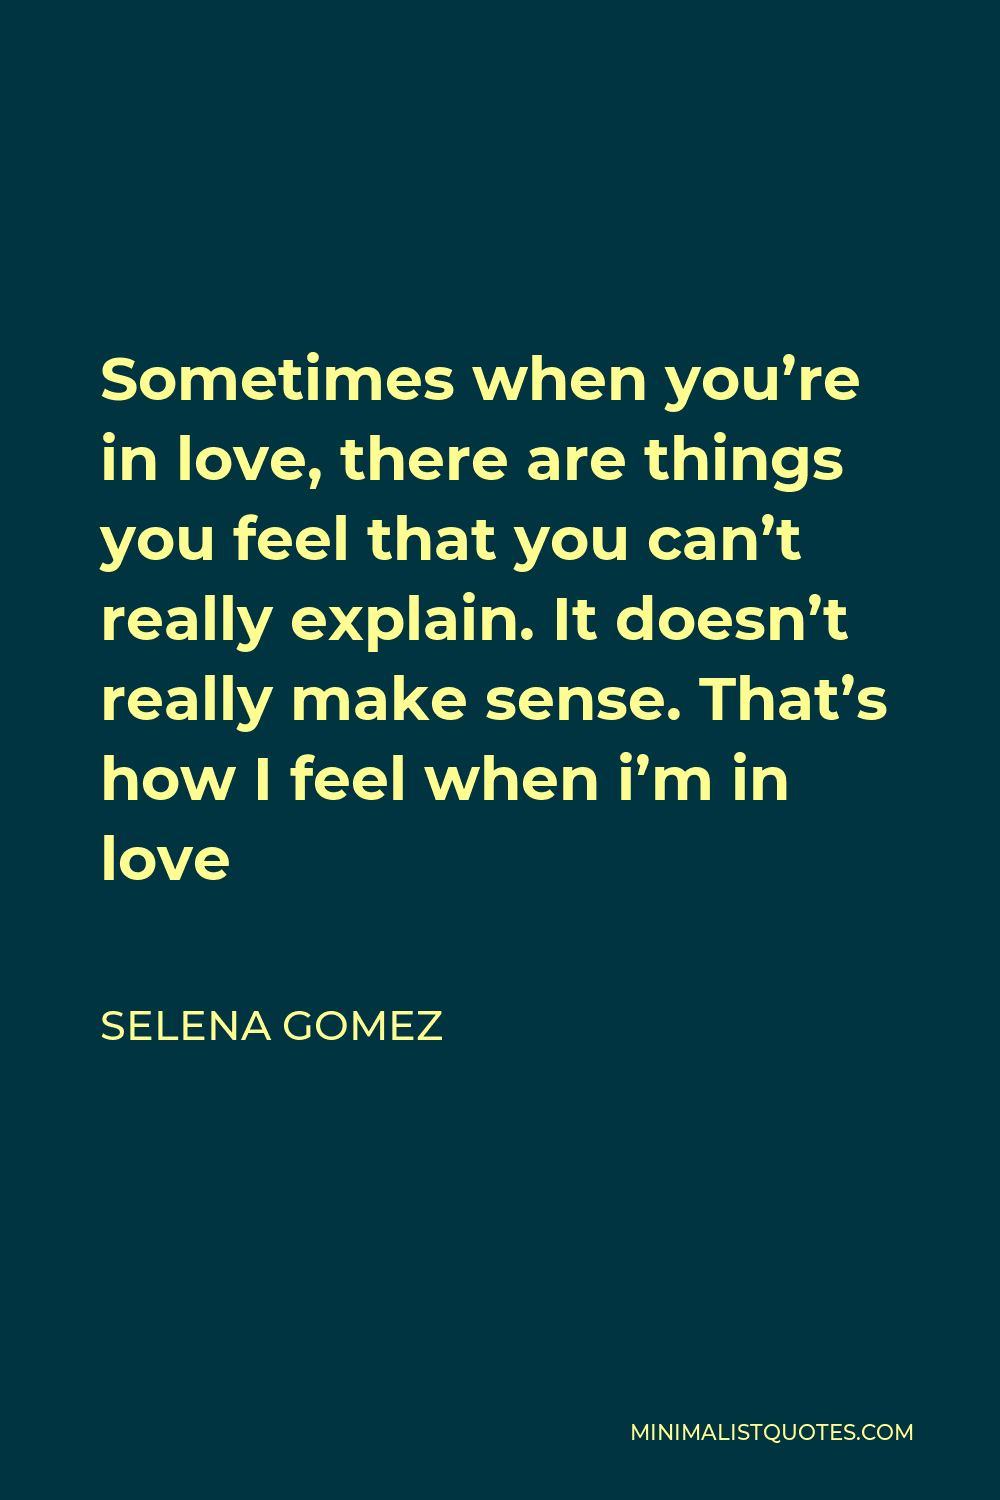 Selena Gomez Quote - Sometimes when you’re in love, there are things you feel that you can’t really explain. It doesn’t really make sense. That’s how I feel when i’m in love